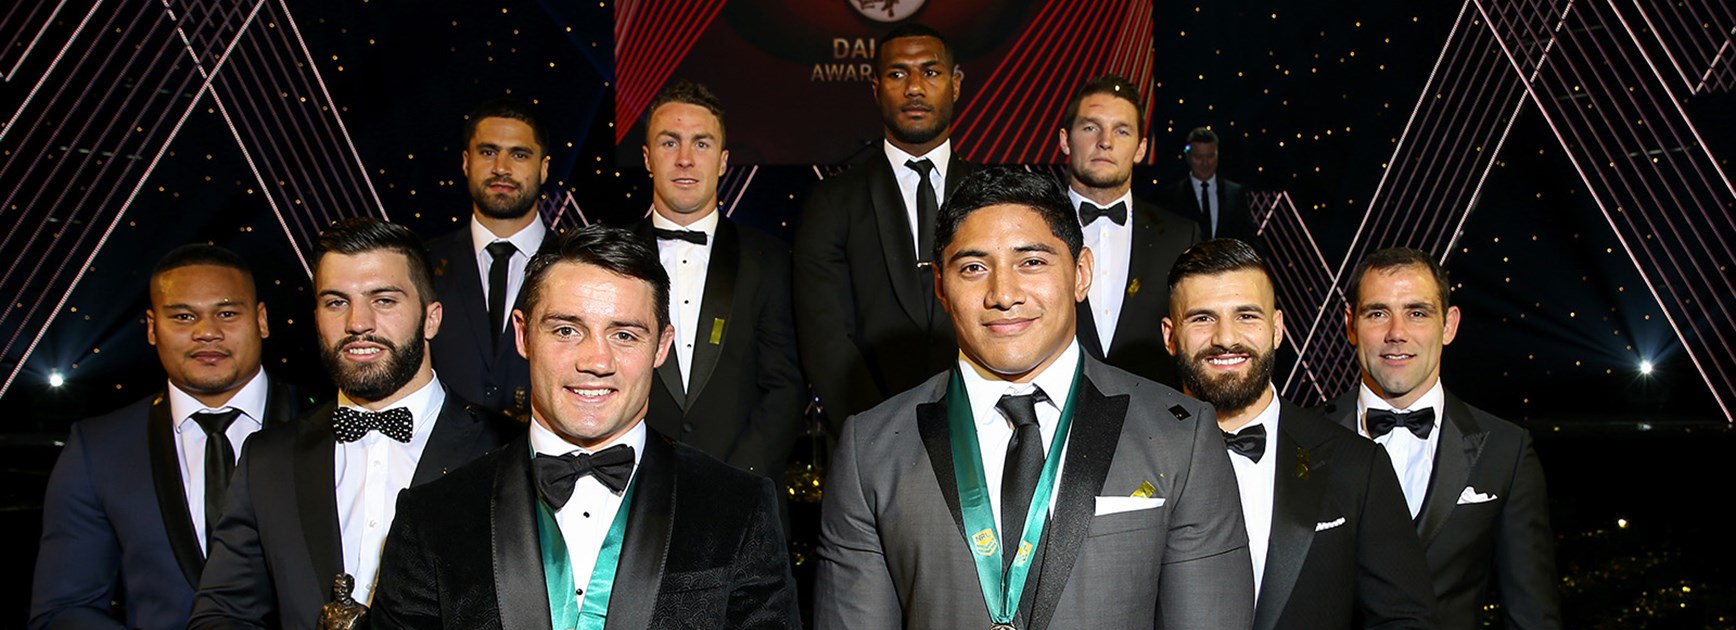 2016 NRL Dally M Team of the Year.